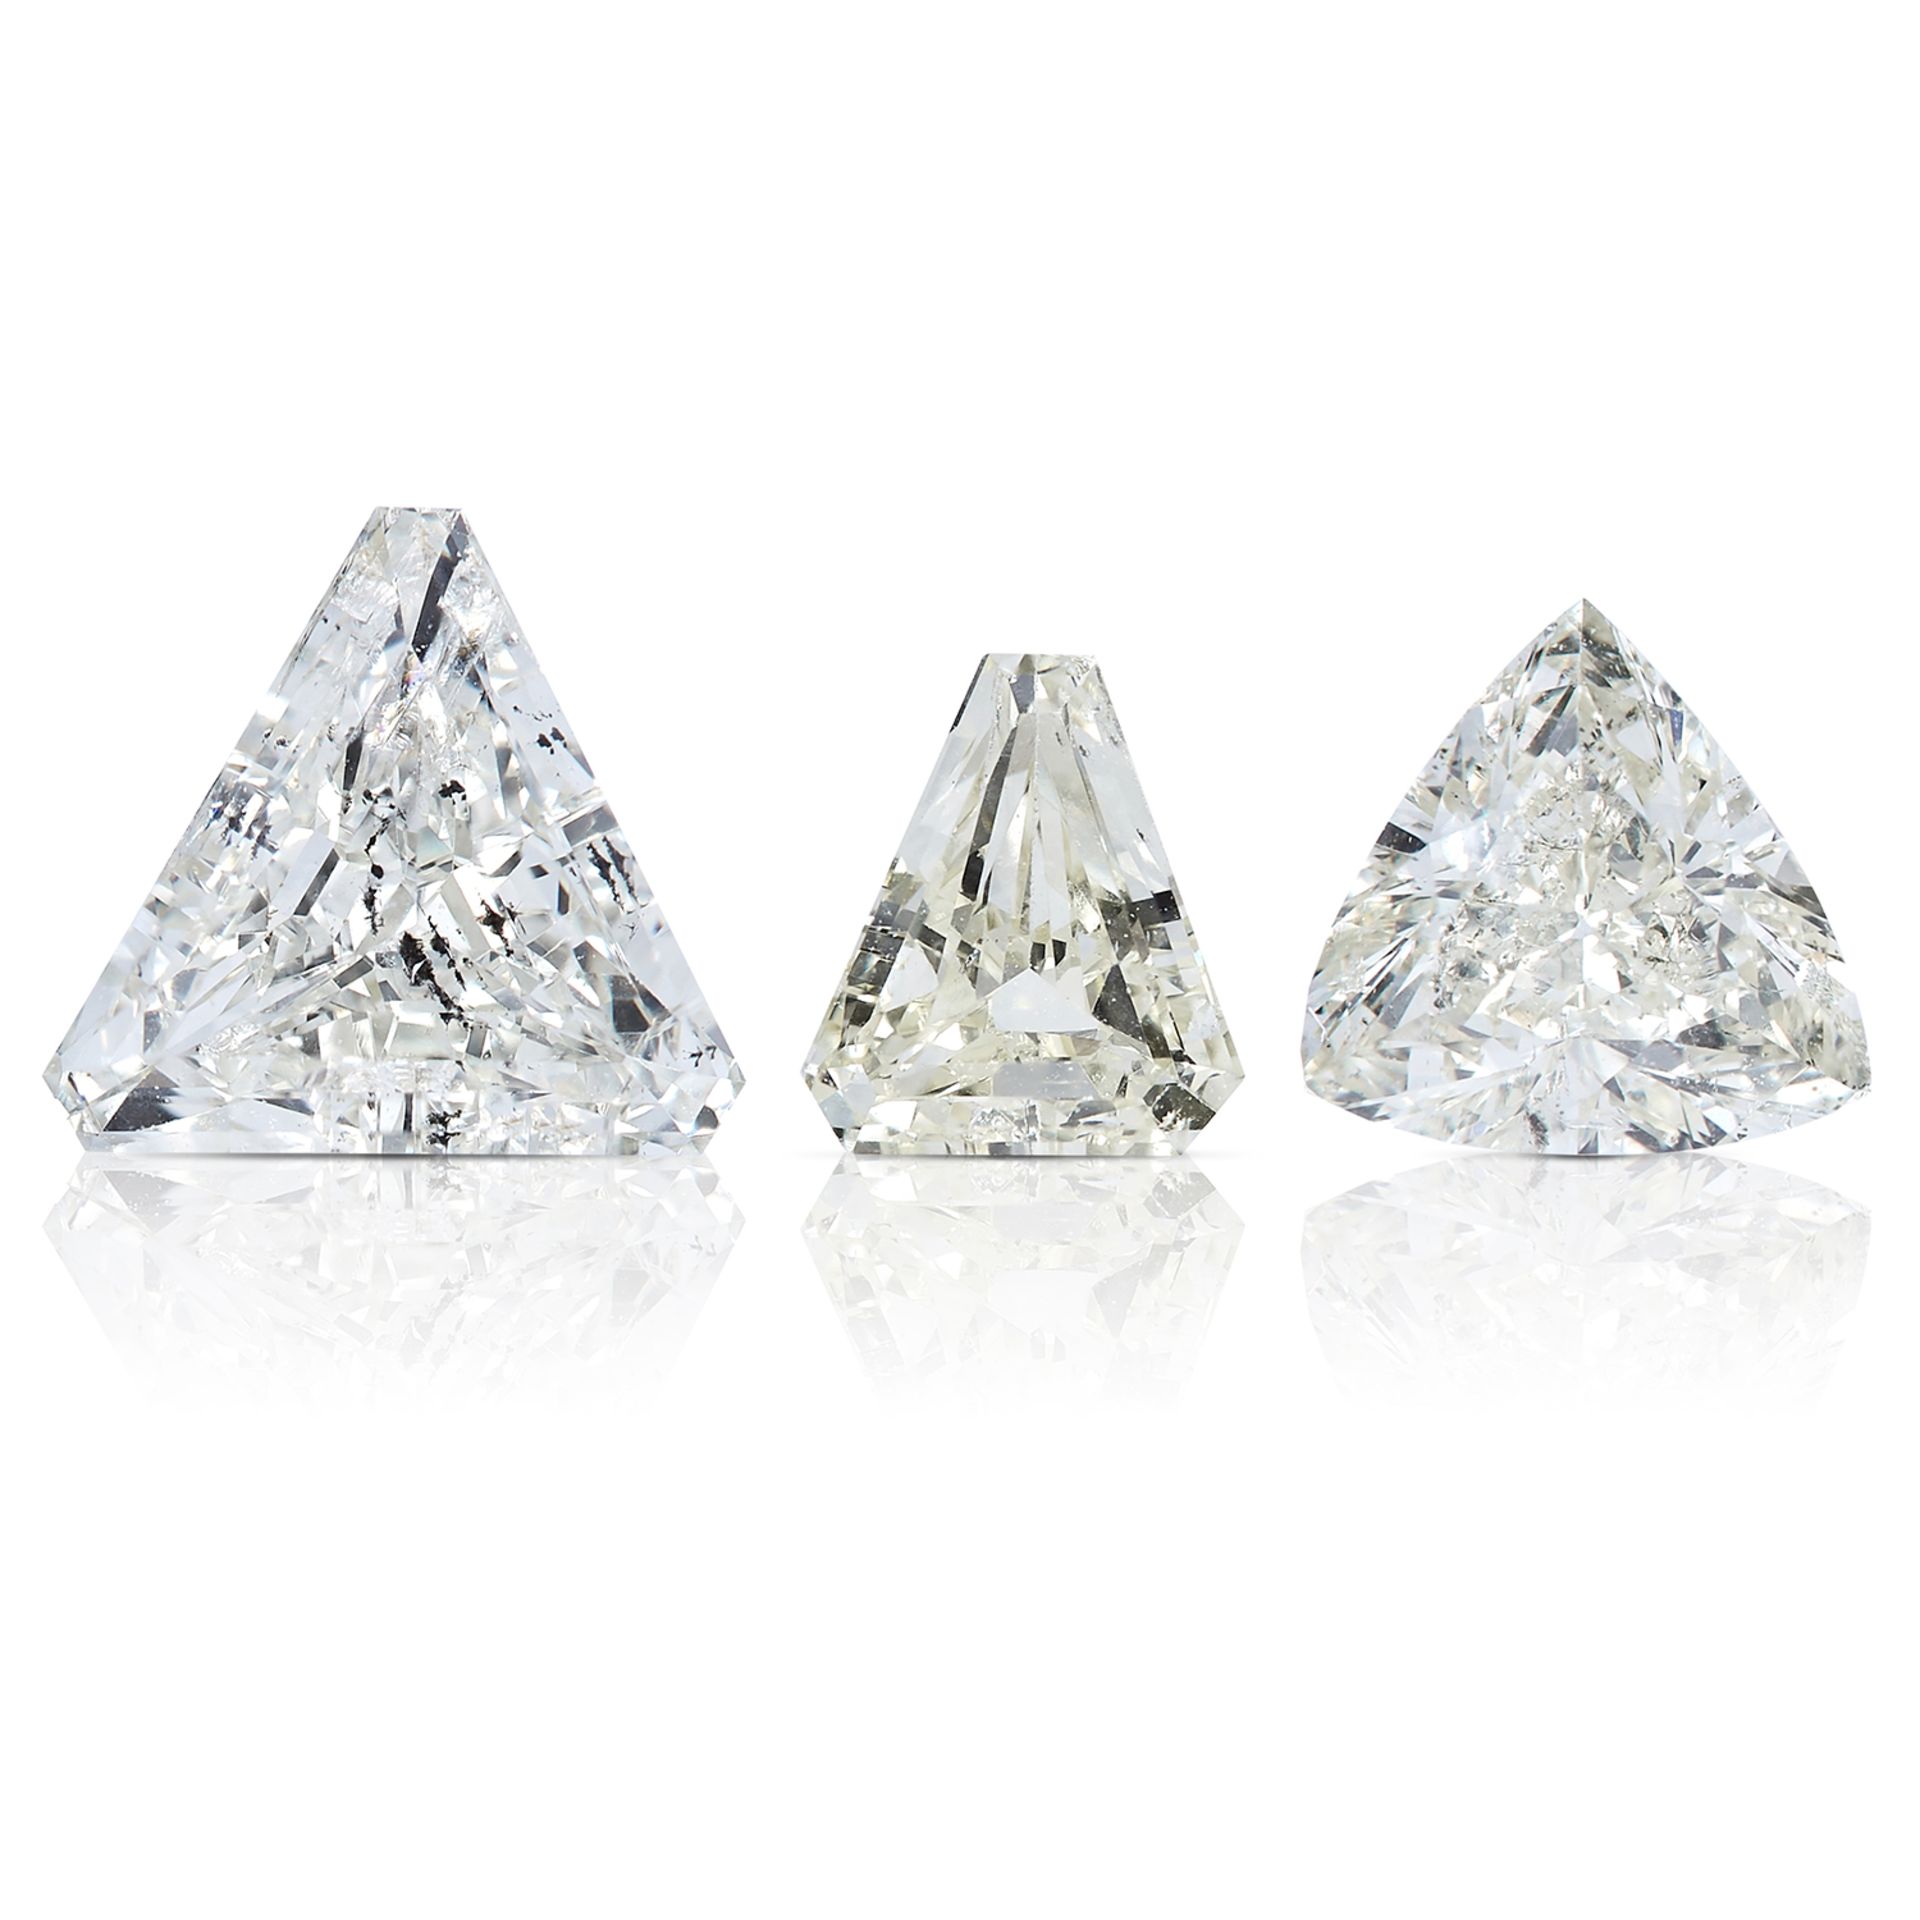 THREE MODIFIED TRILLION CUT DIAMONDS, TOTALLING 1.51cts, UNMOUNTED.